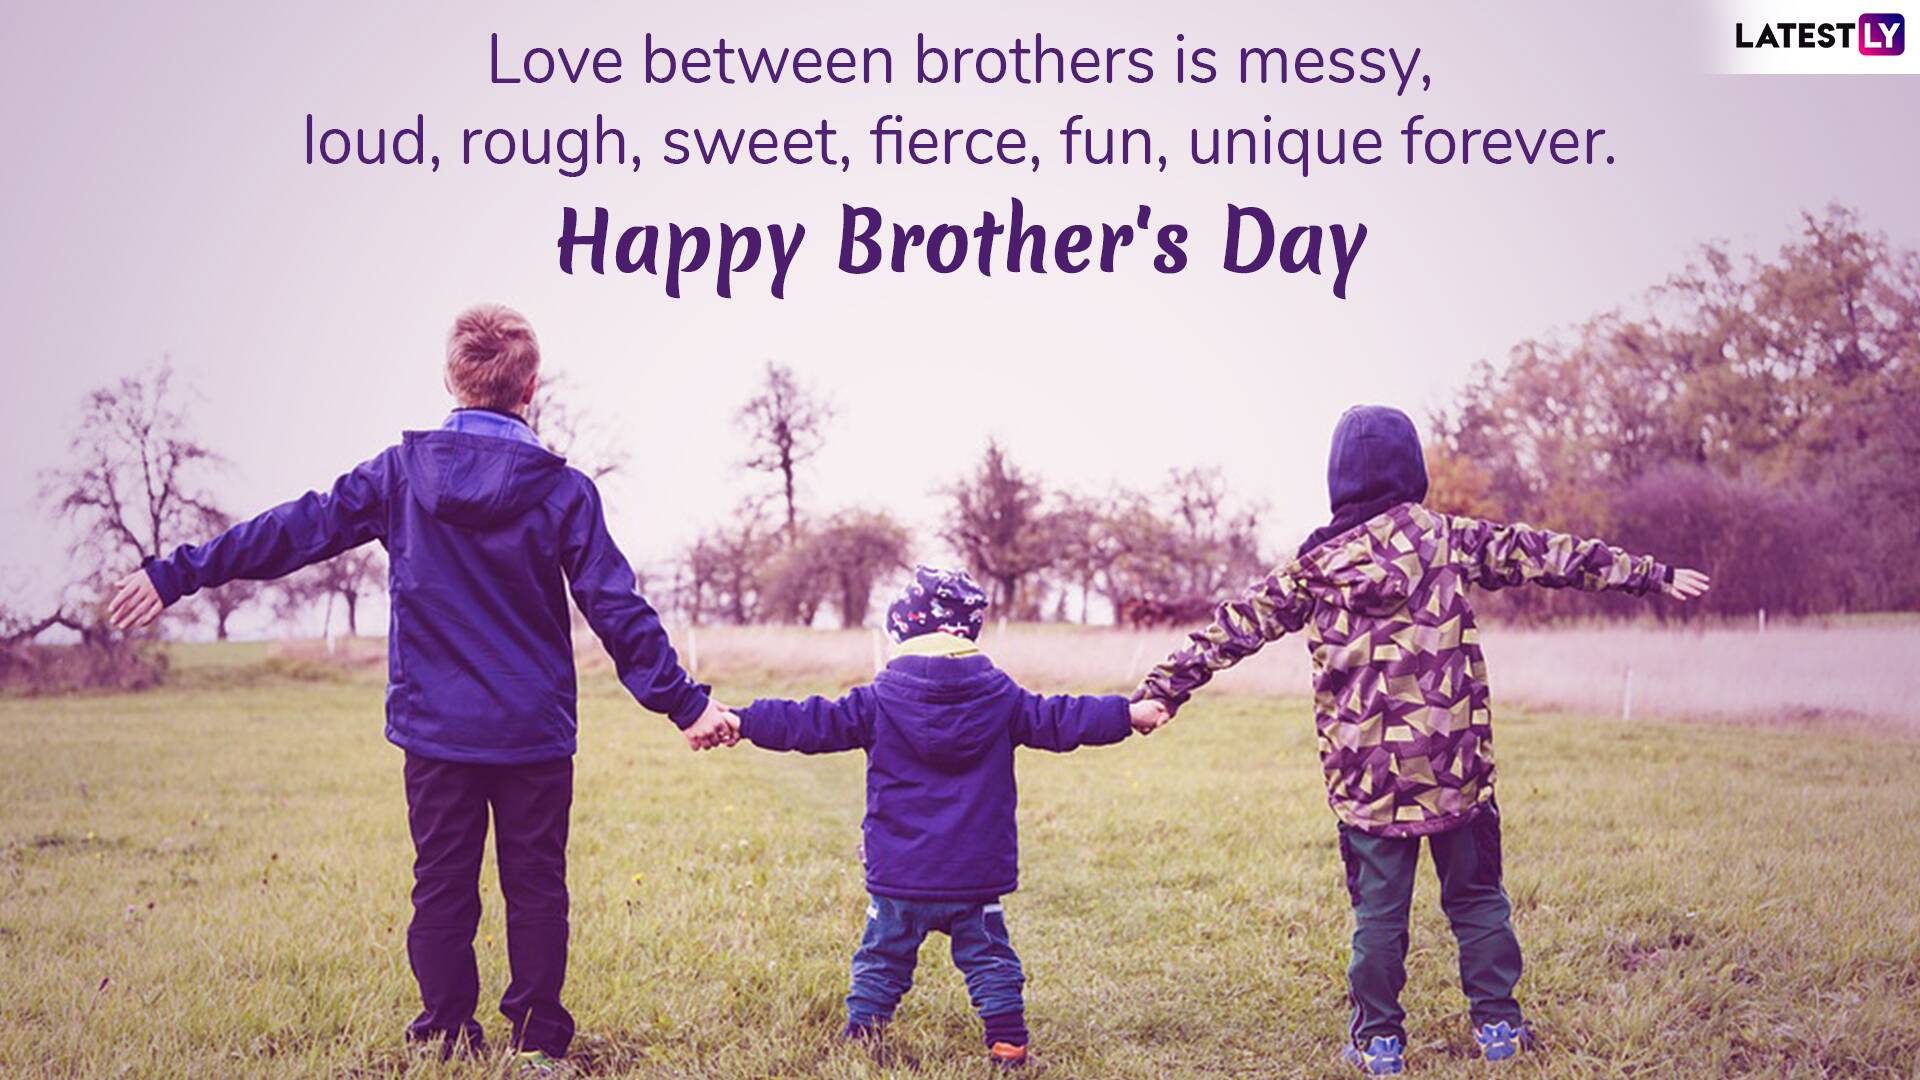 Happy National Brother's Day 2019 Greetings: WhatsApp Stickers